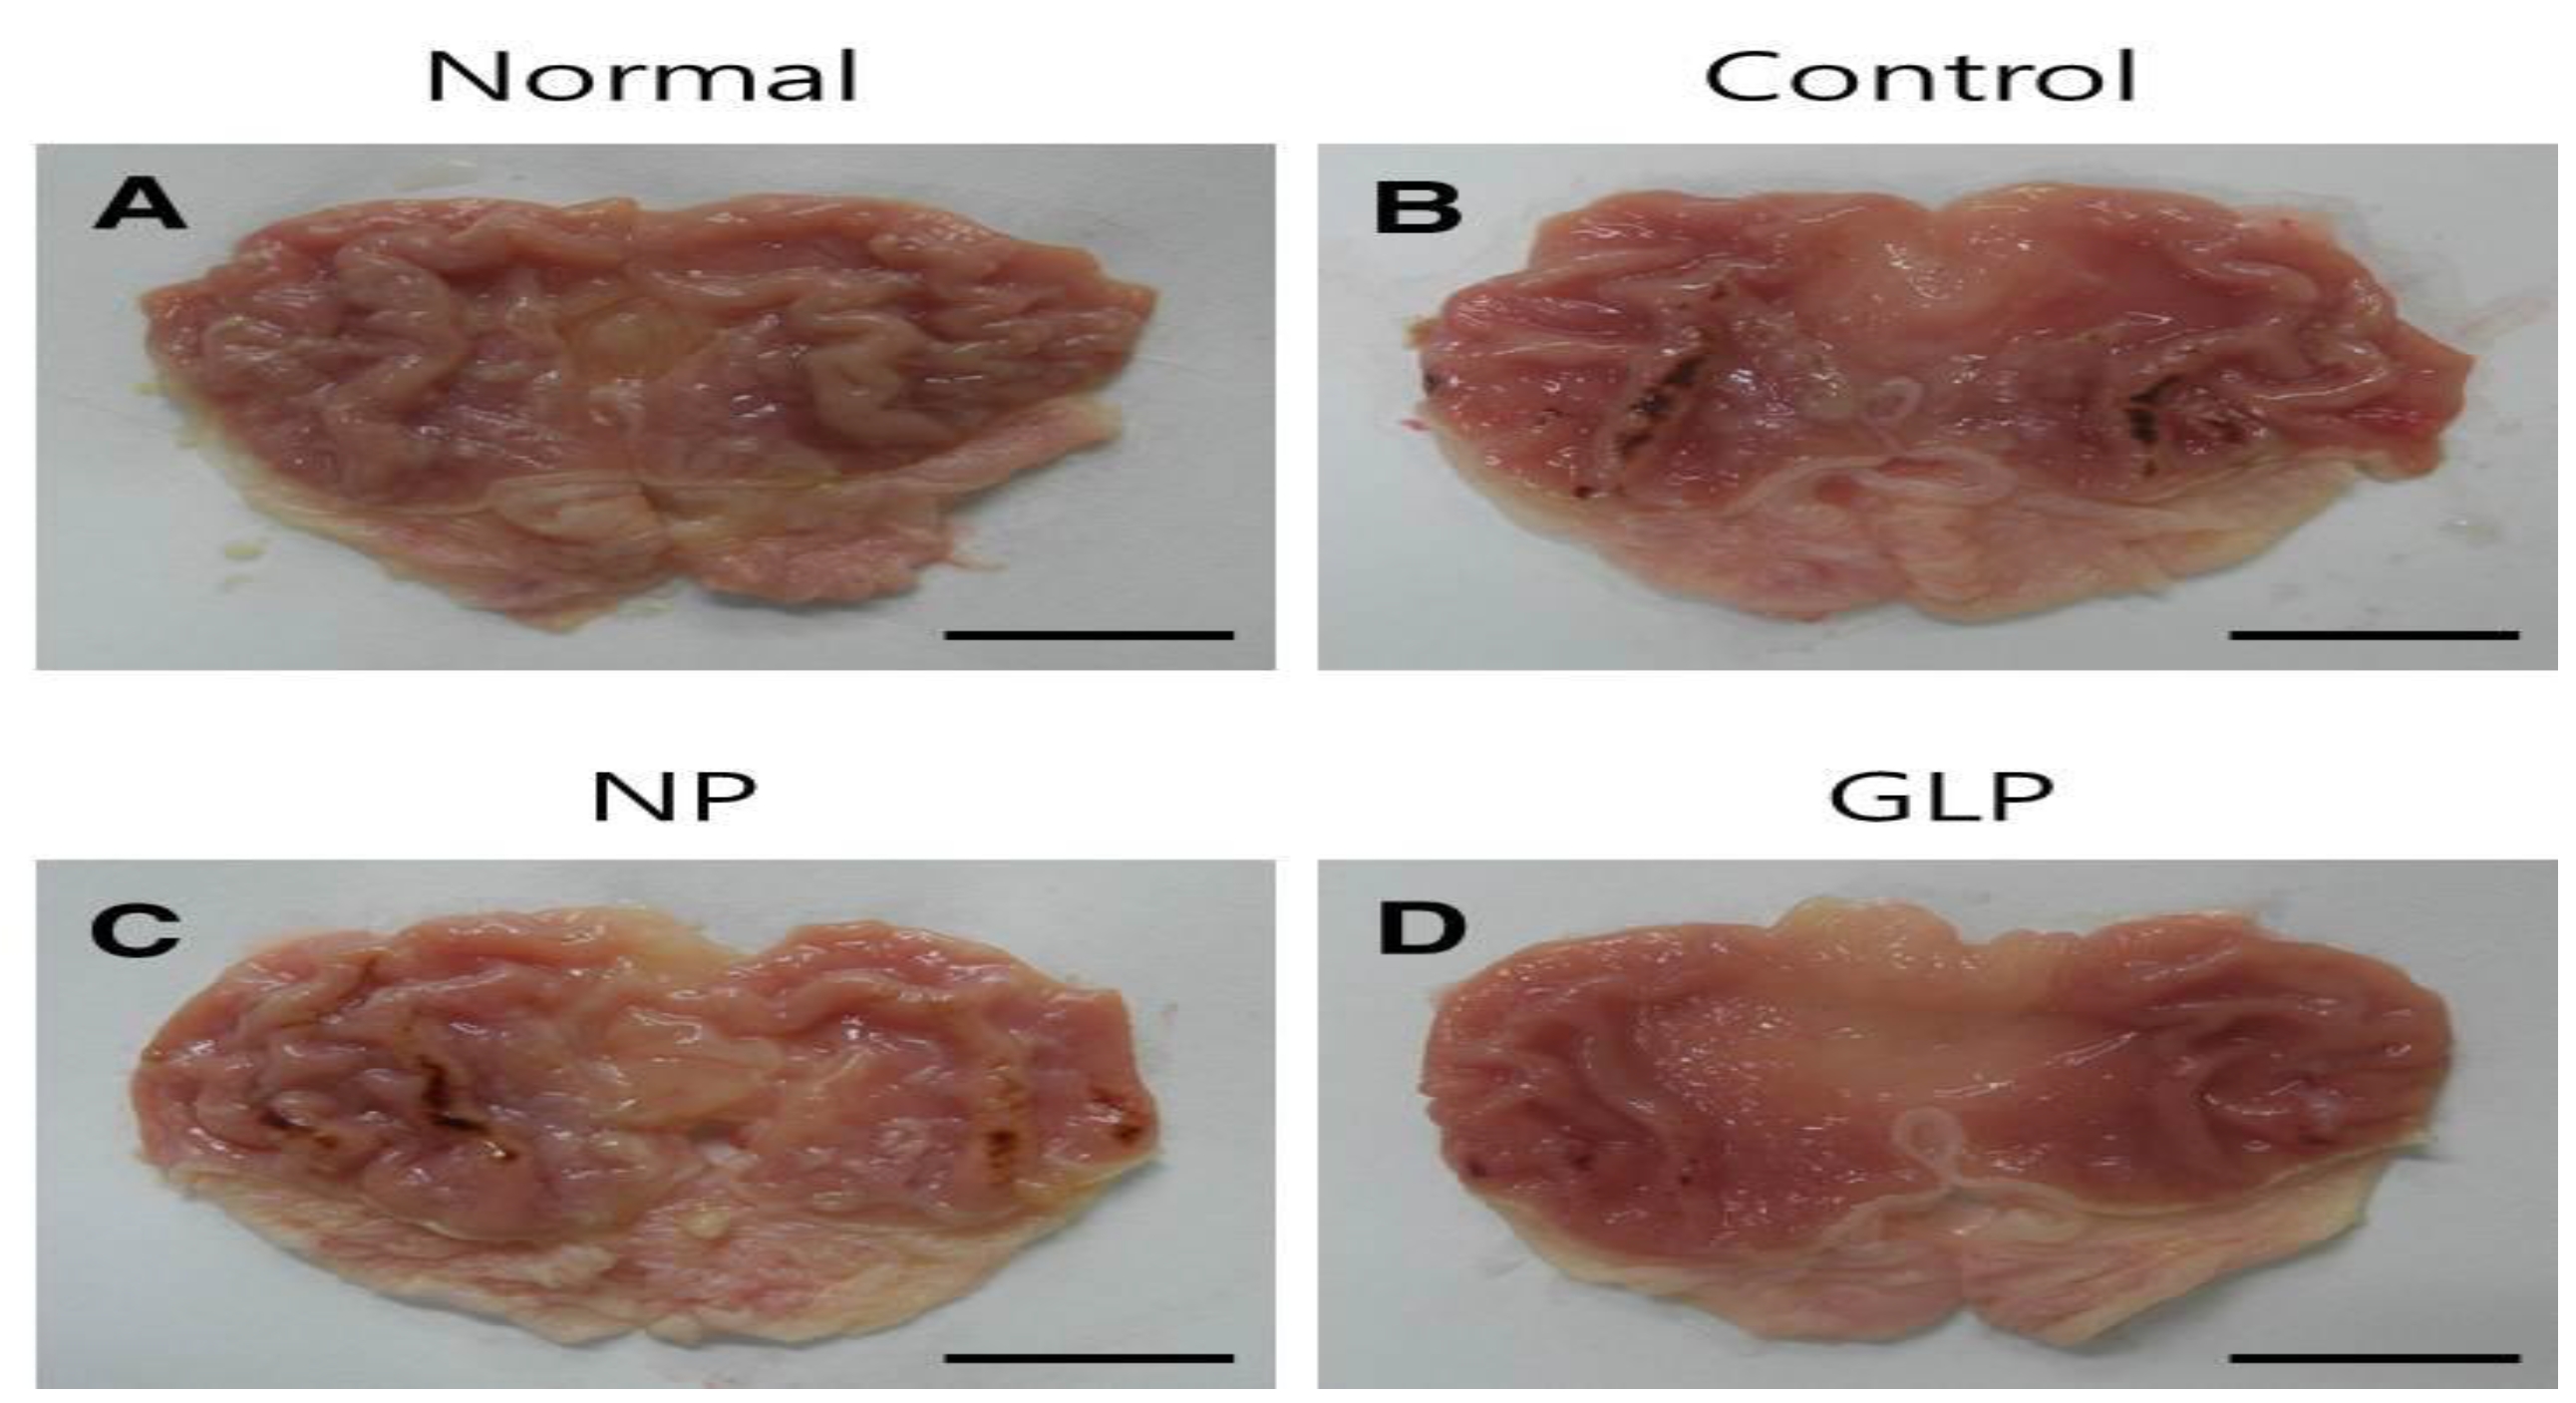 Gross appearance of EtOH-induced chronic gastric ulcer in rats.